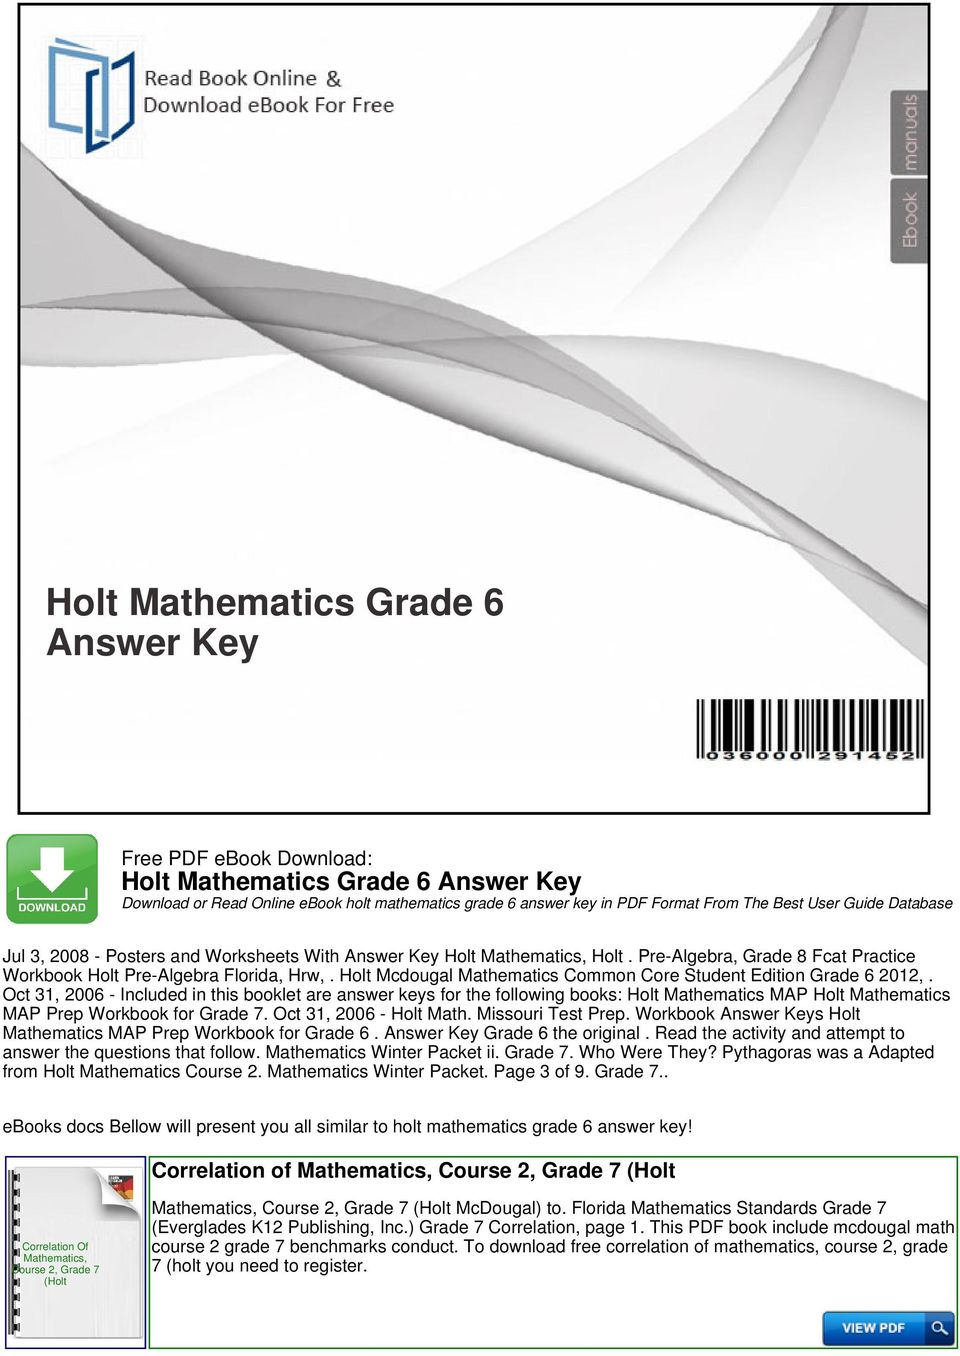 Oct 31, 2006 - Included in this booklet are answer keys for the following books: Holt MAP Holt MAP Prep Workbook for 7. Oct 31, 2006 - Holt Math. Missouri Test Prep.